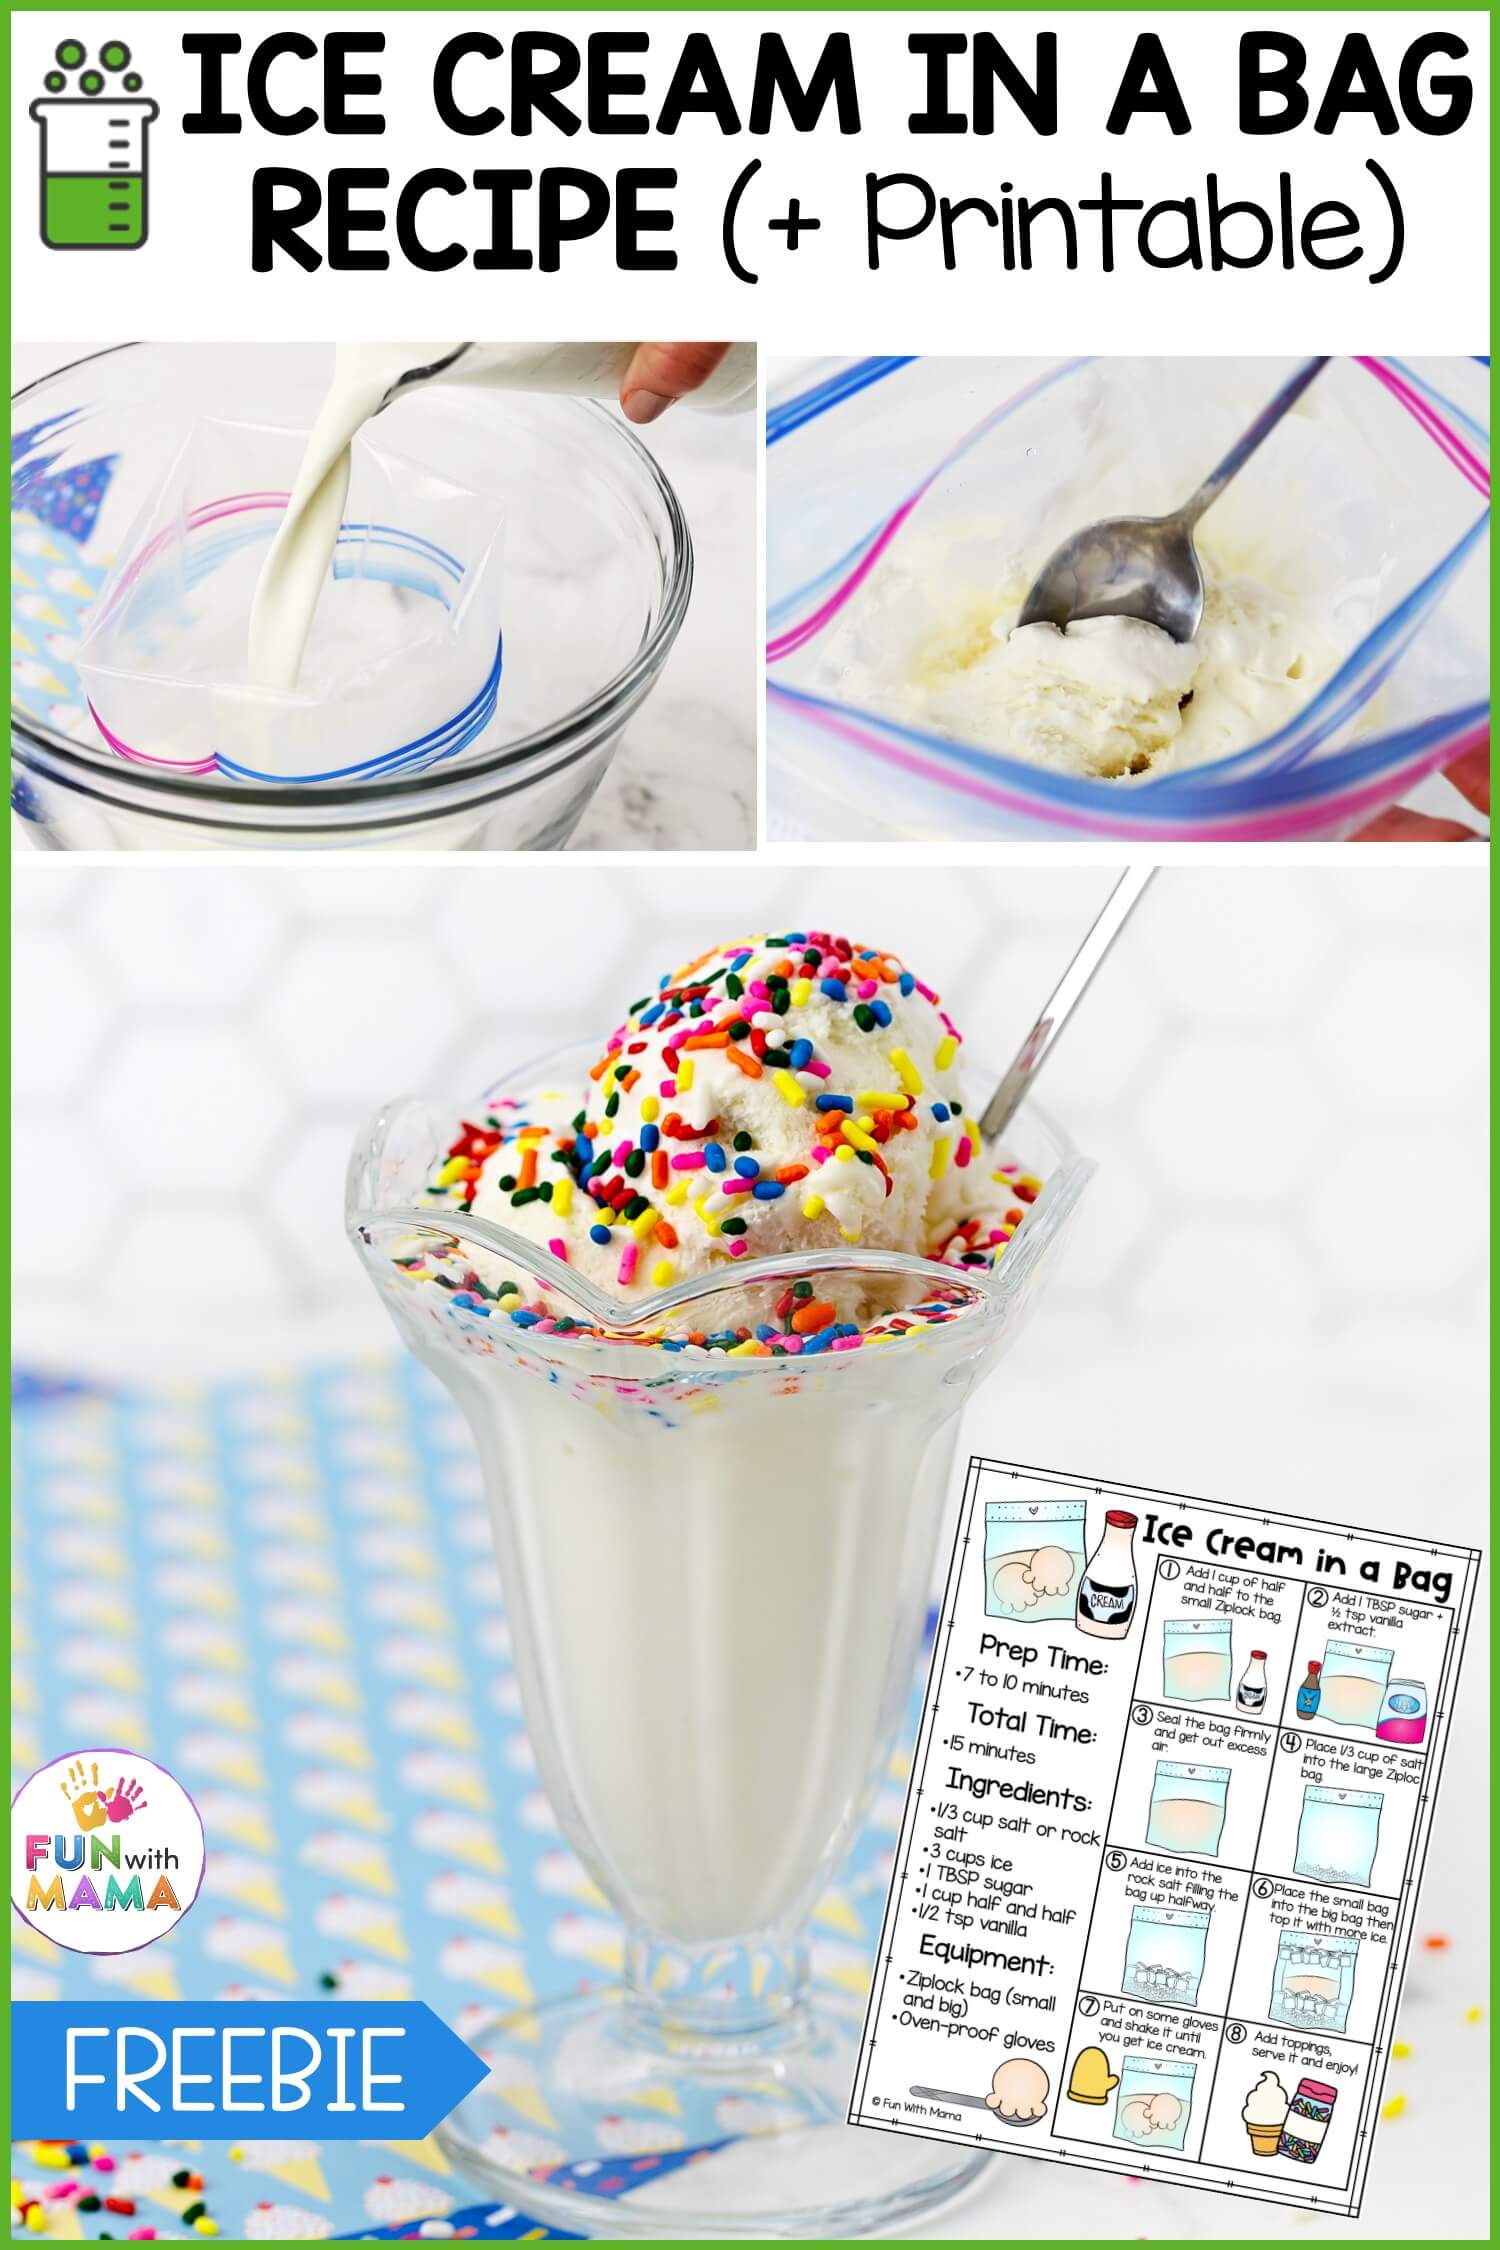 Learn how to make ice cream in a bag with this easy recipe and printable pdf